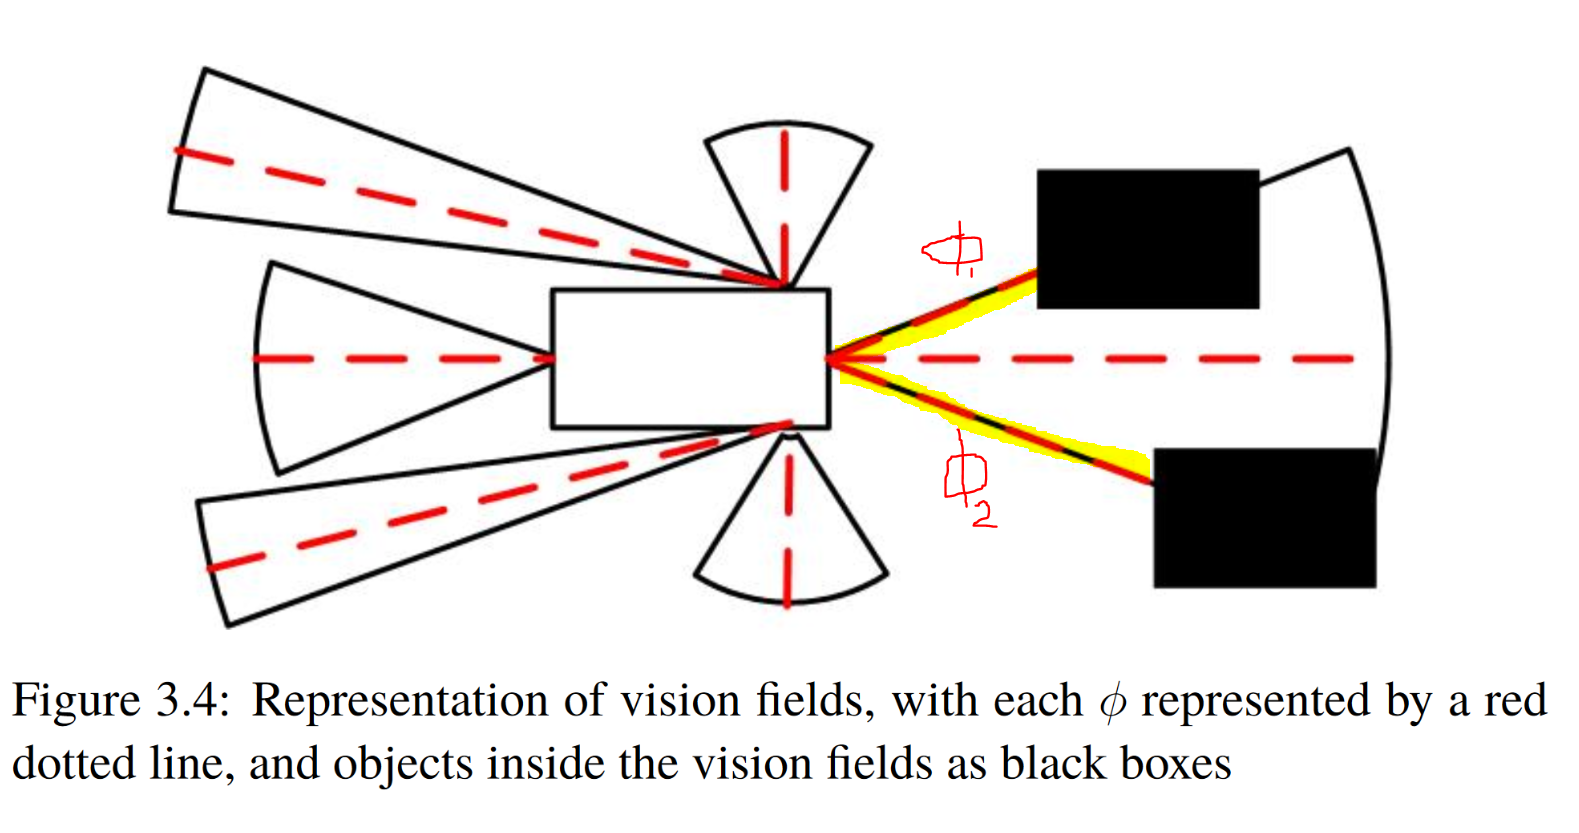 The φ are distances read from the origin of a vision field and are represented by red dotted lines. They take value in [0, 1], where φi = 1 means the dotted line does not hit any object and φi = 0 means it hits an object at origin. In this case, two objects are inside the front vision field. Hence φ1 = 0.4 and φ2 = 0.6.. Source.